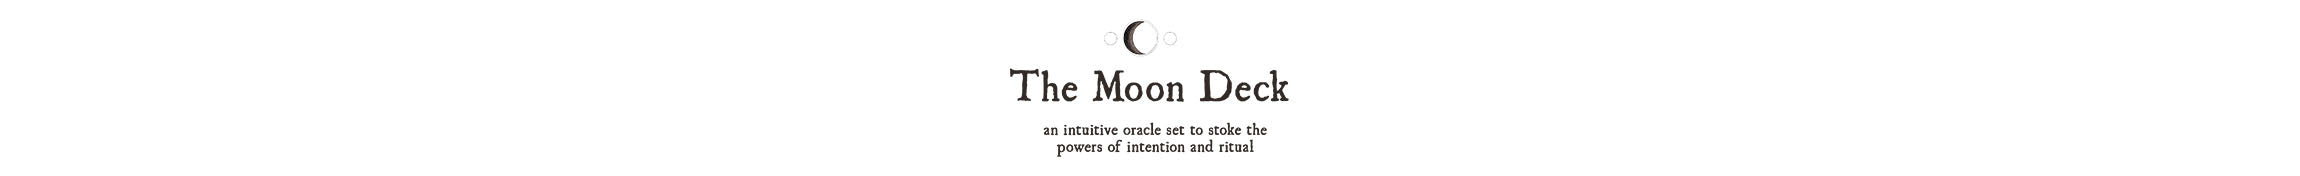 The Moon Deck